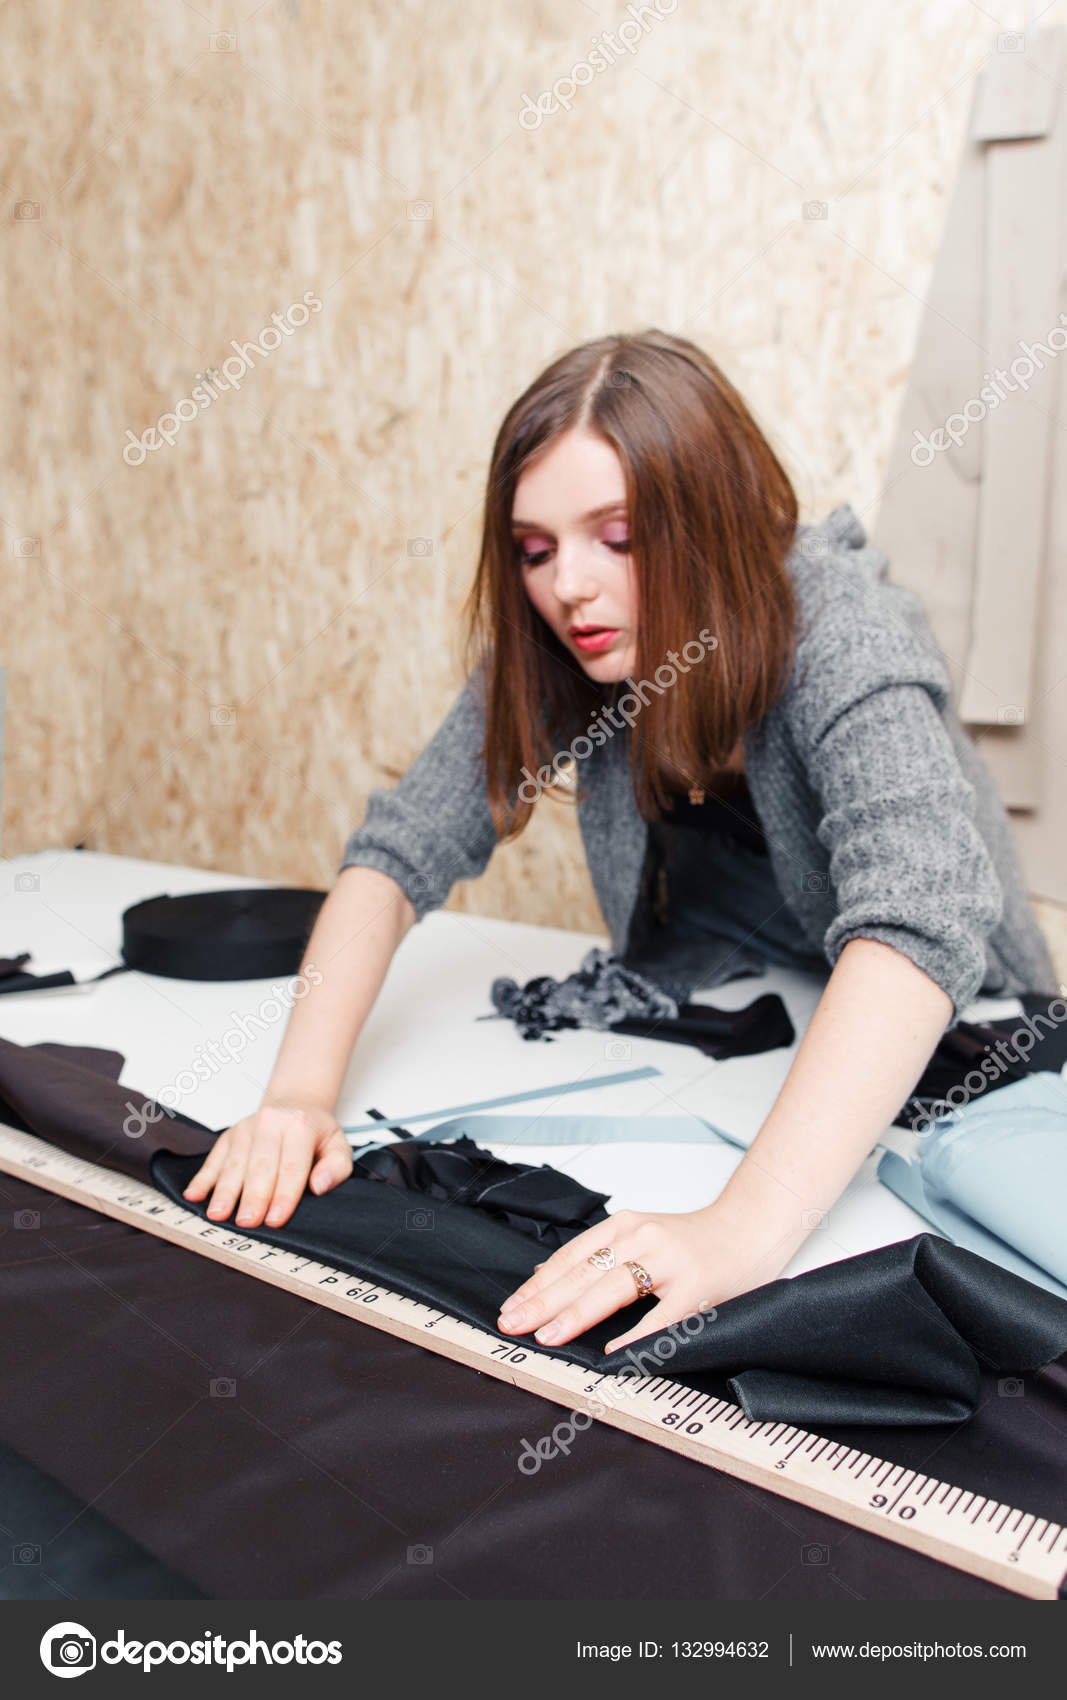 Female Fashion Designer Measuring and Cutting Fabric before Sewing